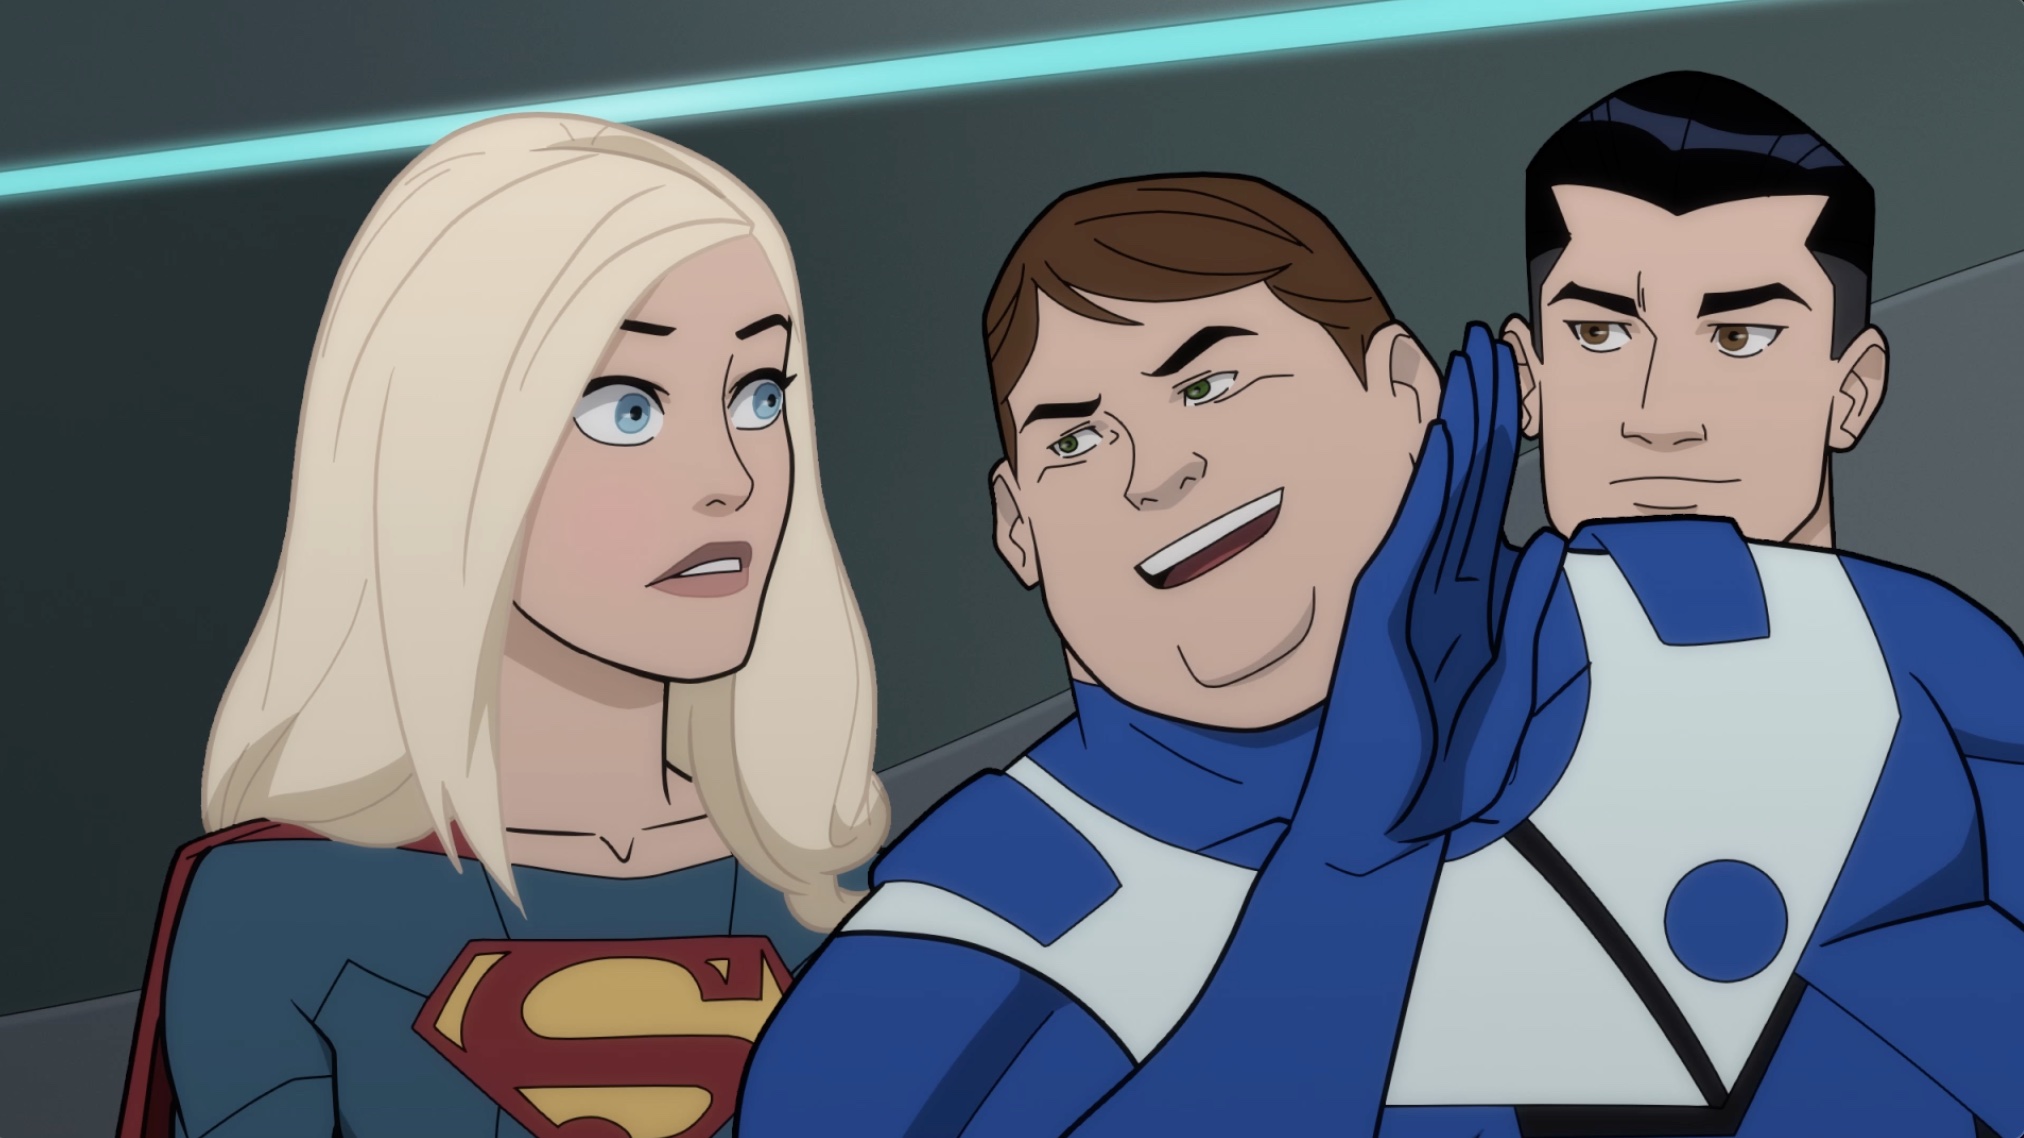 Bouncing Boy offers a little unsolicited insight to Supergirl, while Mon-El watches, during an early scene in Legion of Super-Heroes.